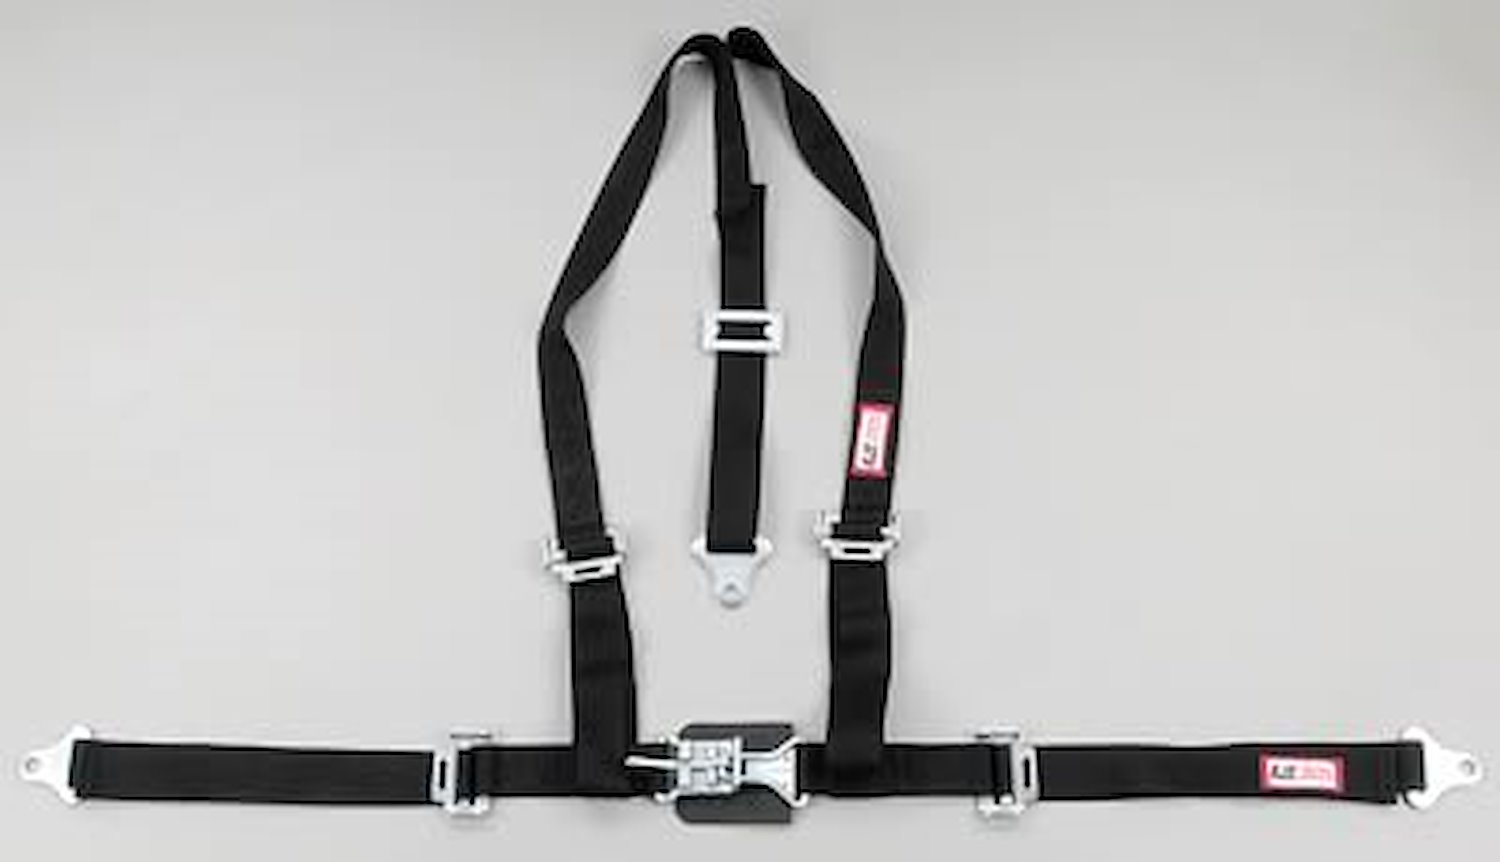 NON-SFI L&L HARNESS 3 PULL UP Lap Belt SEWN IN 2 Shoulder Harness V ROLL BAR Mount w/STERNUM STRAP ALL WRAP ENDS RED